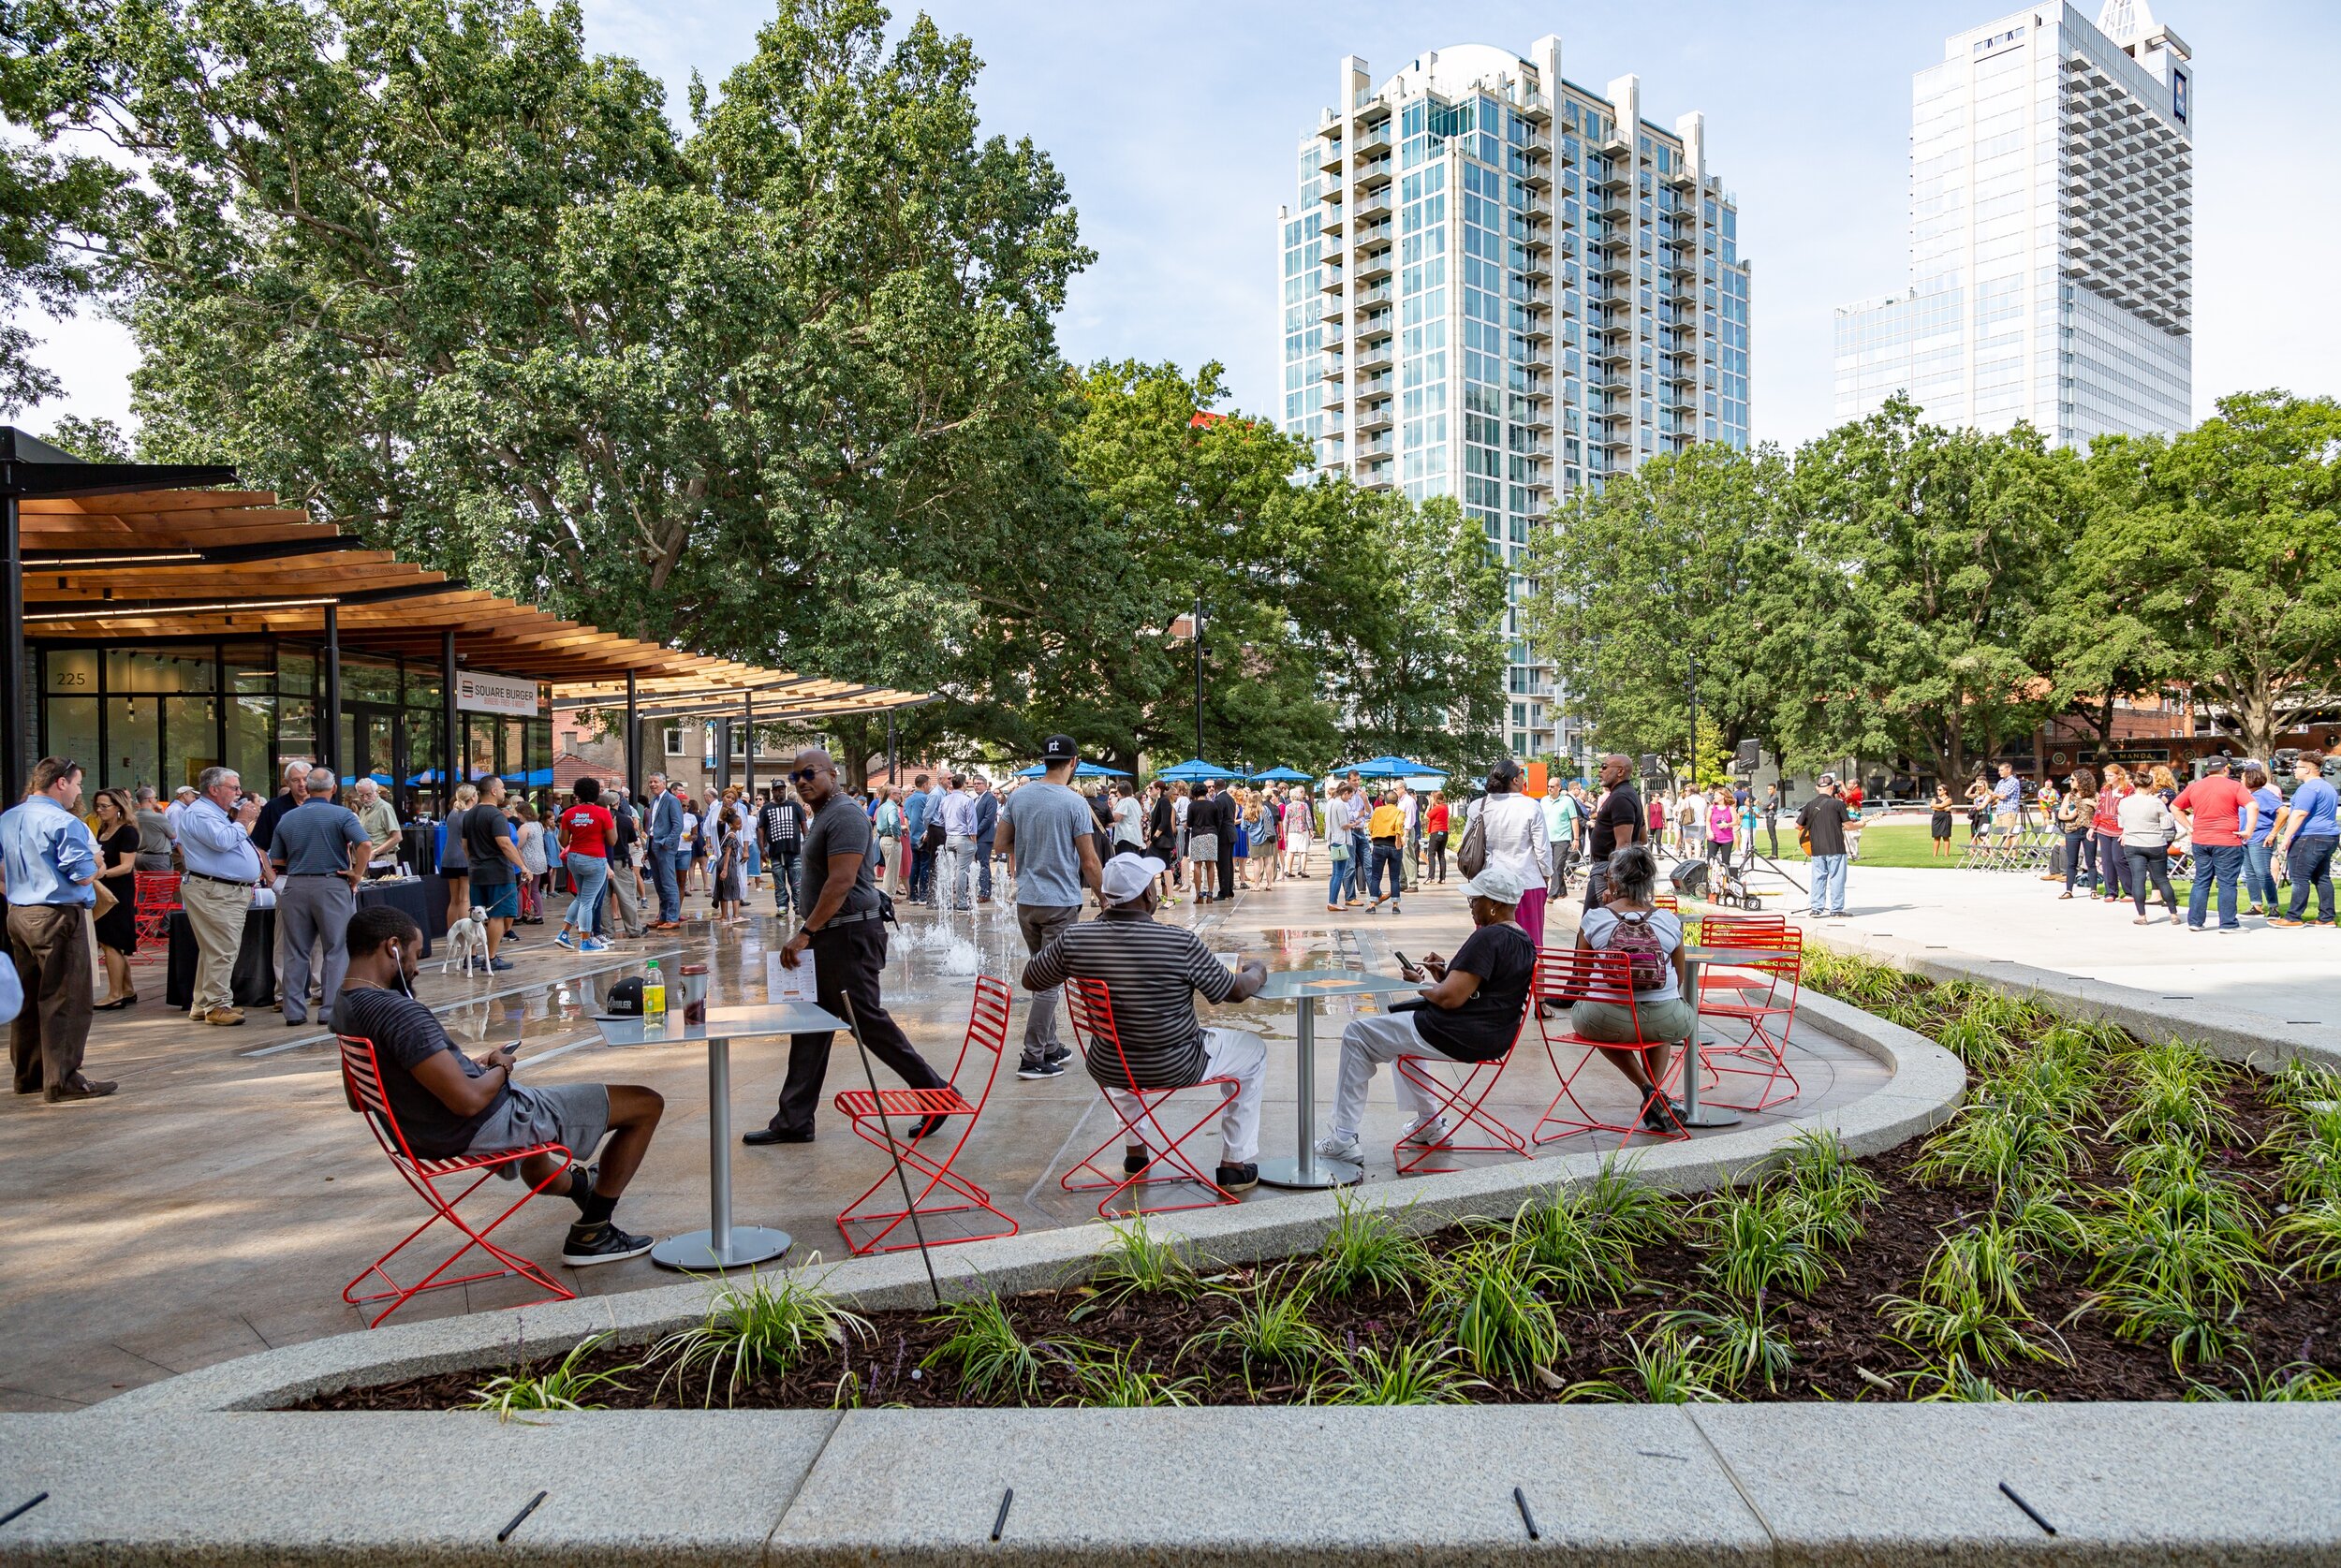  Moore Square Park in Raleigh, NC designed by Sasaki features a flexible civic plaza with an interactive fountain, a space for movable seating or stage events, and a pavilion that contains a café and public restrooms. 